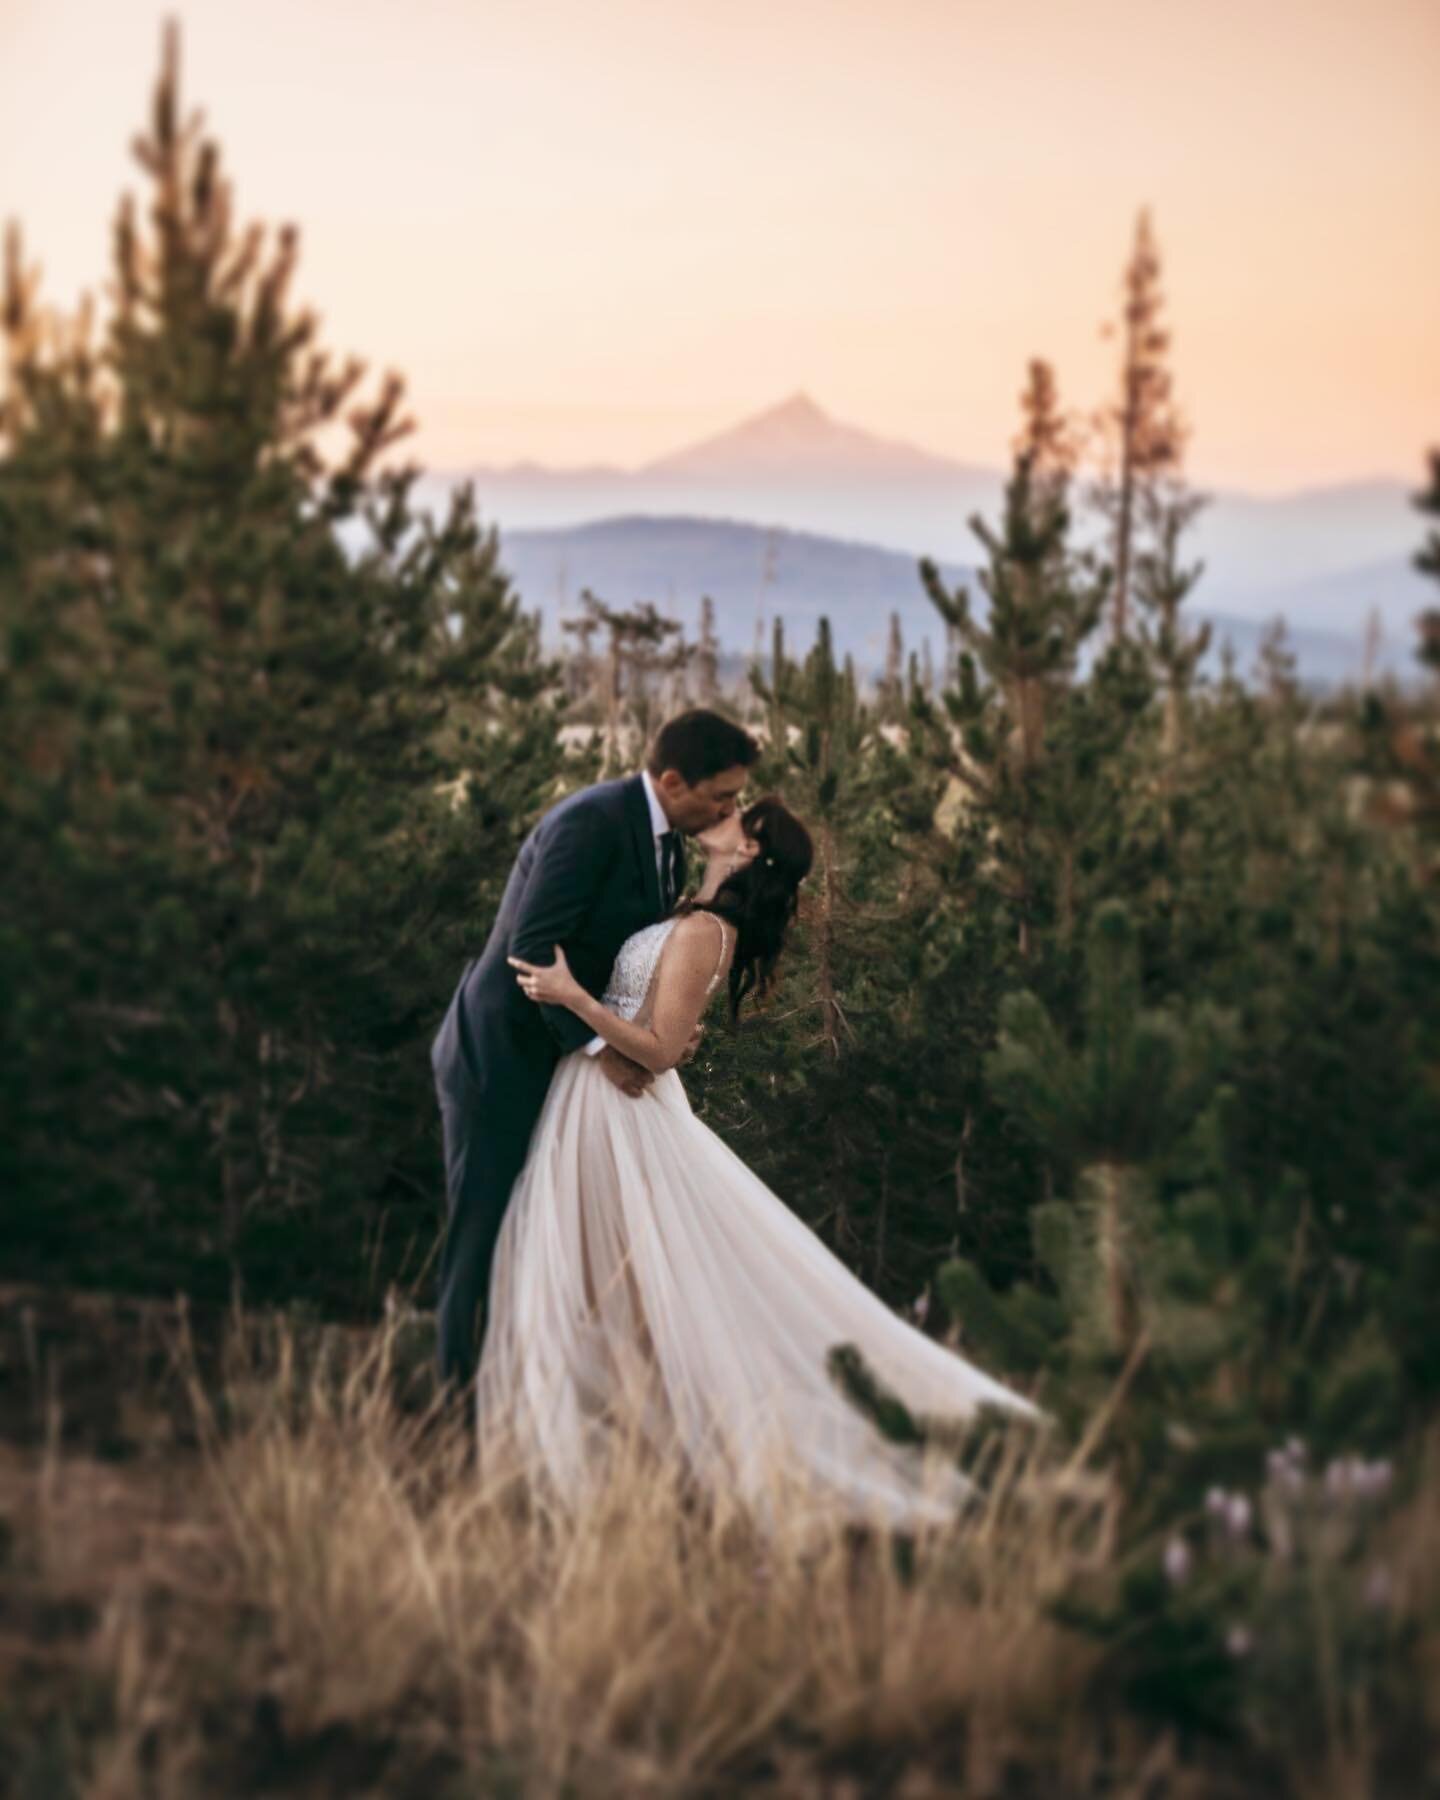 Jenn and Evans first dance after their elopement was so special.  Live music with that view at sunset... doesn&rsquo;t get much better than that! &hearts;️
.
.
.
#elopeinbend #elopementphotographer #sistersoregonelopement #mountainelopement #sisterso